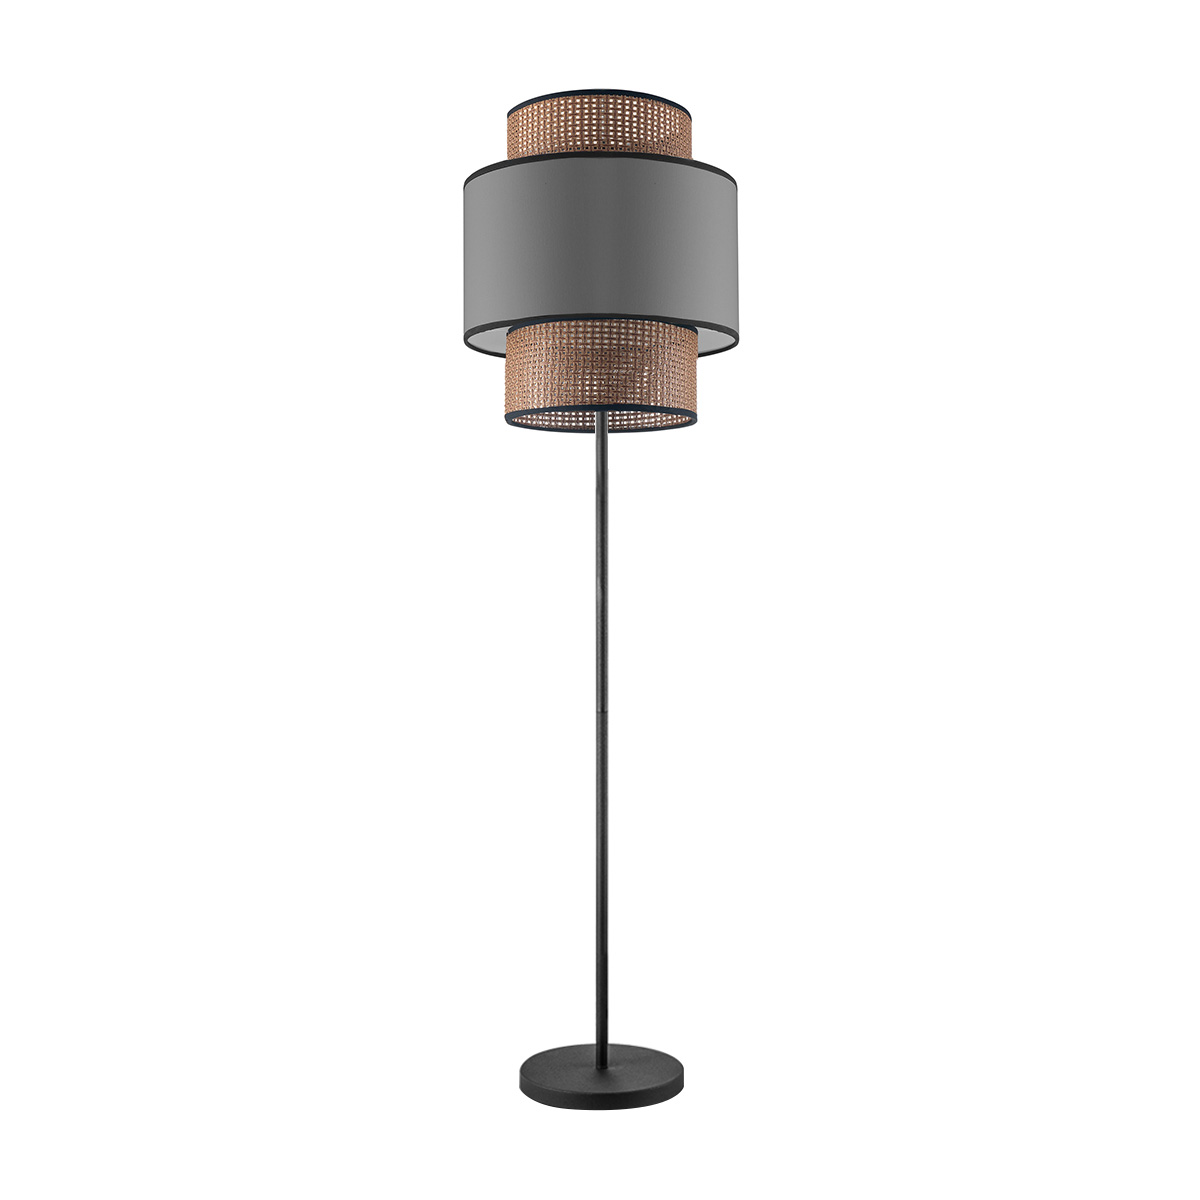 Tangla lighting - TLF7014-30GY - LED floor lamp 1 Light - metal and natural rattan and TC fabric in natural and grey - night - E27